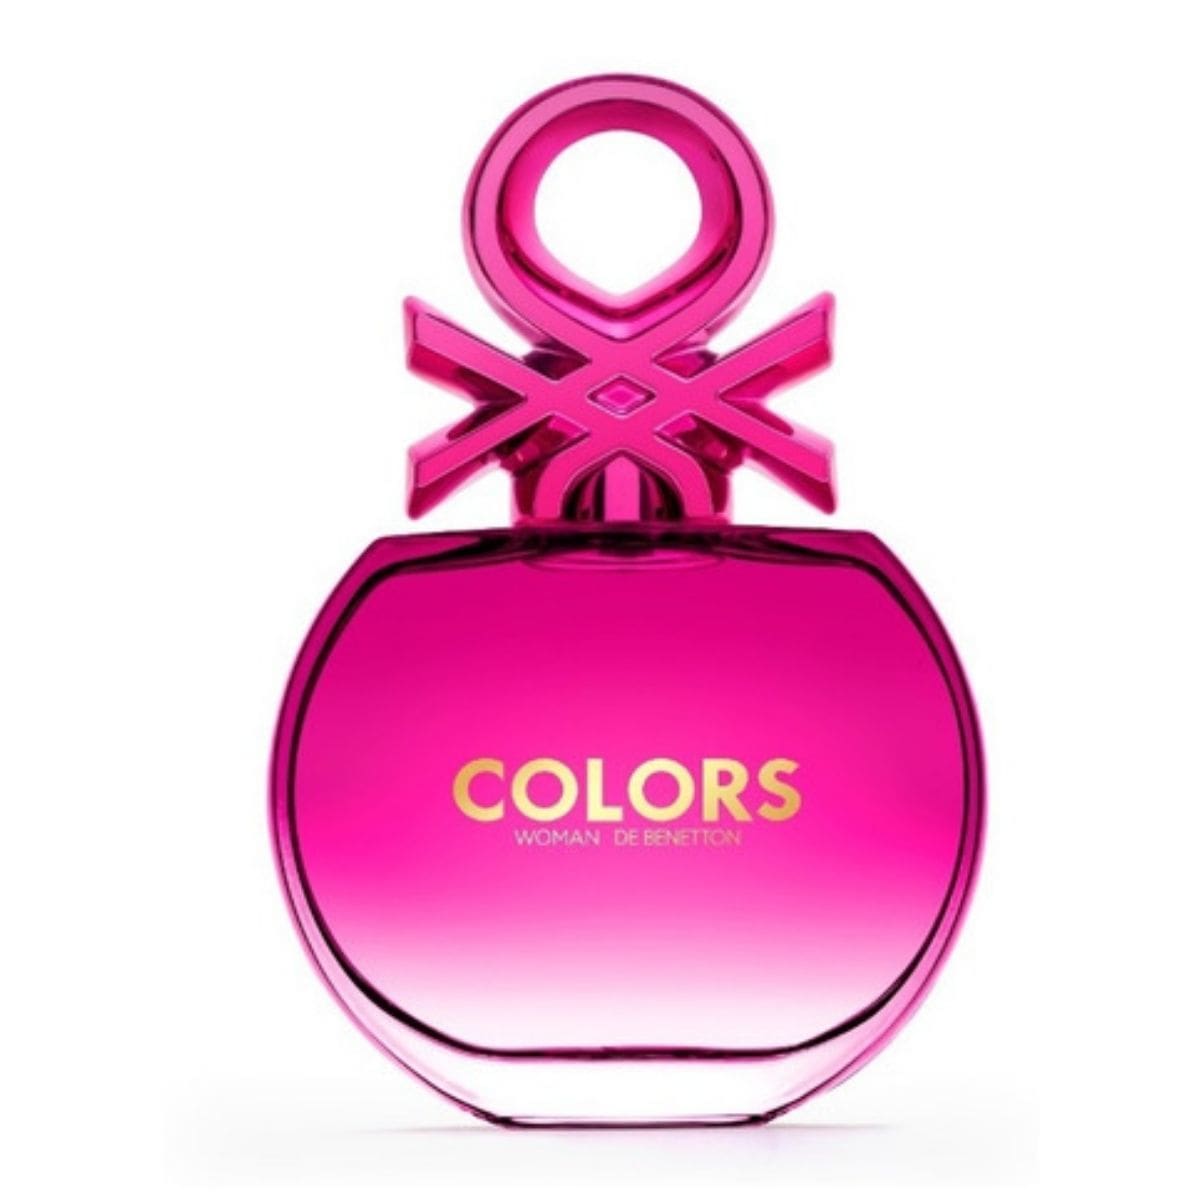 Perfume-Benetton-Colors-Pink-Tester